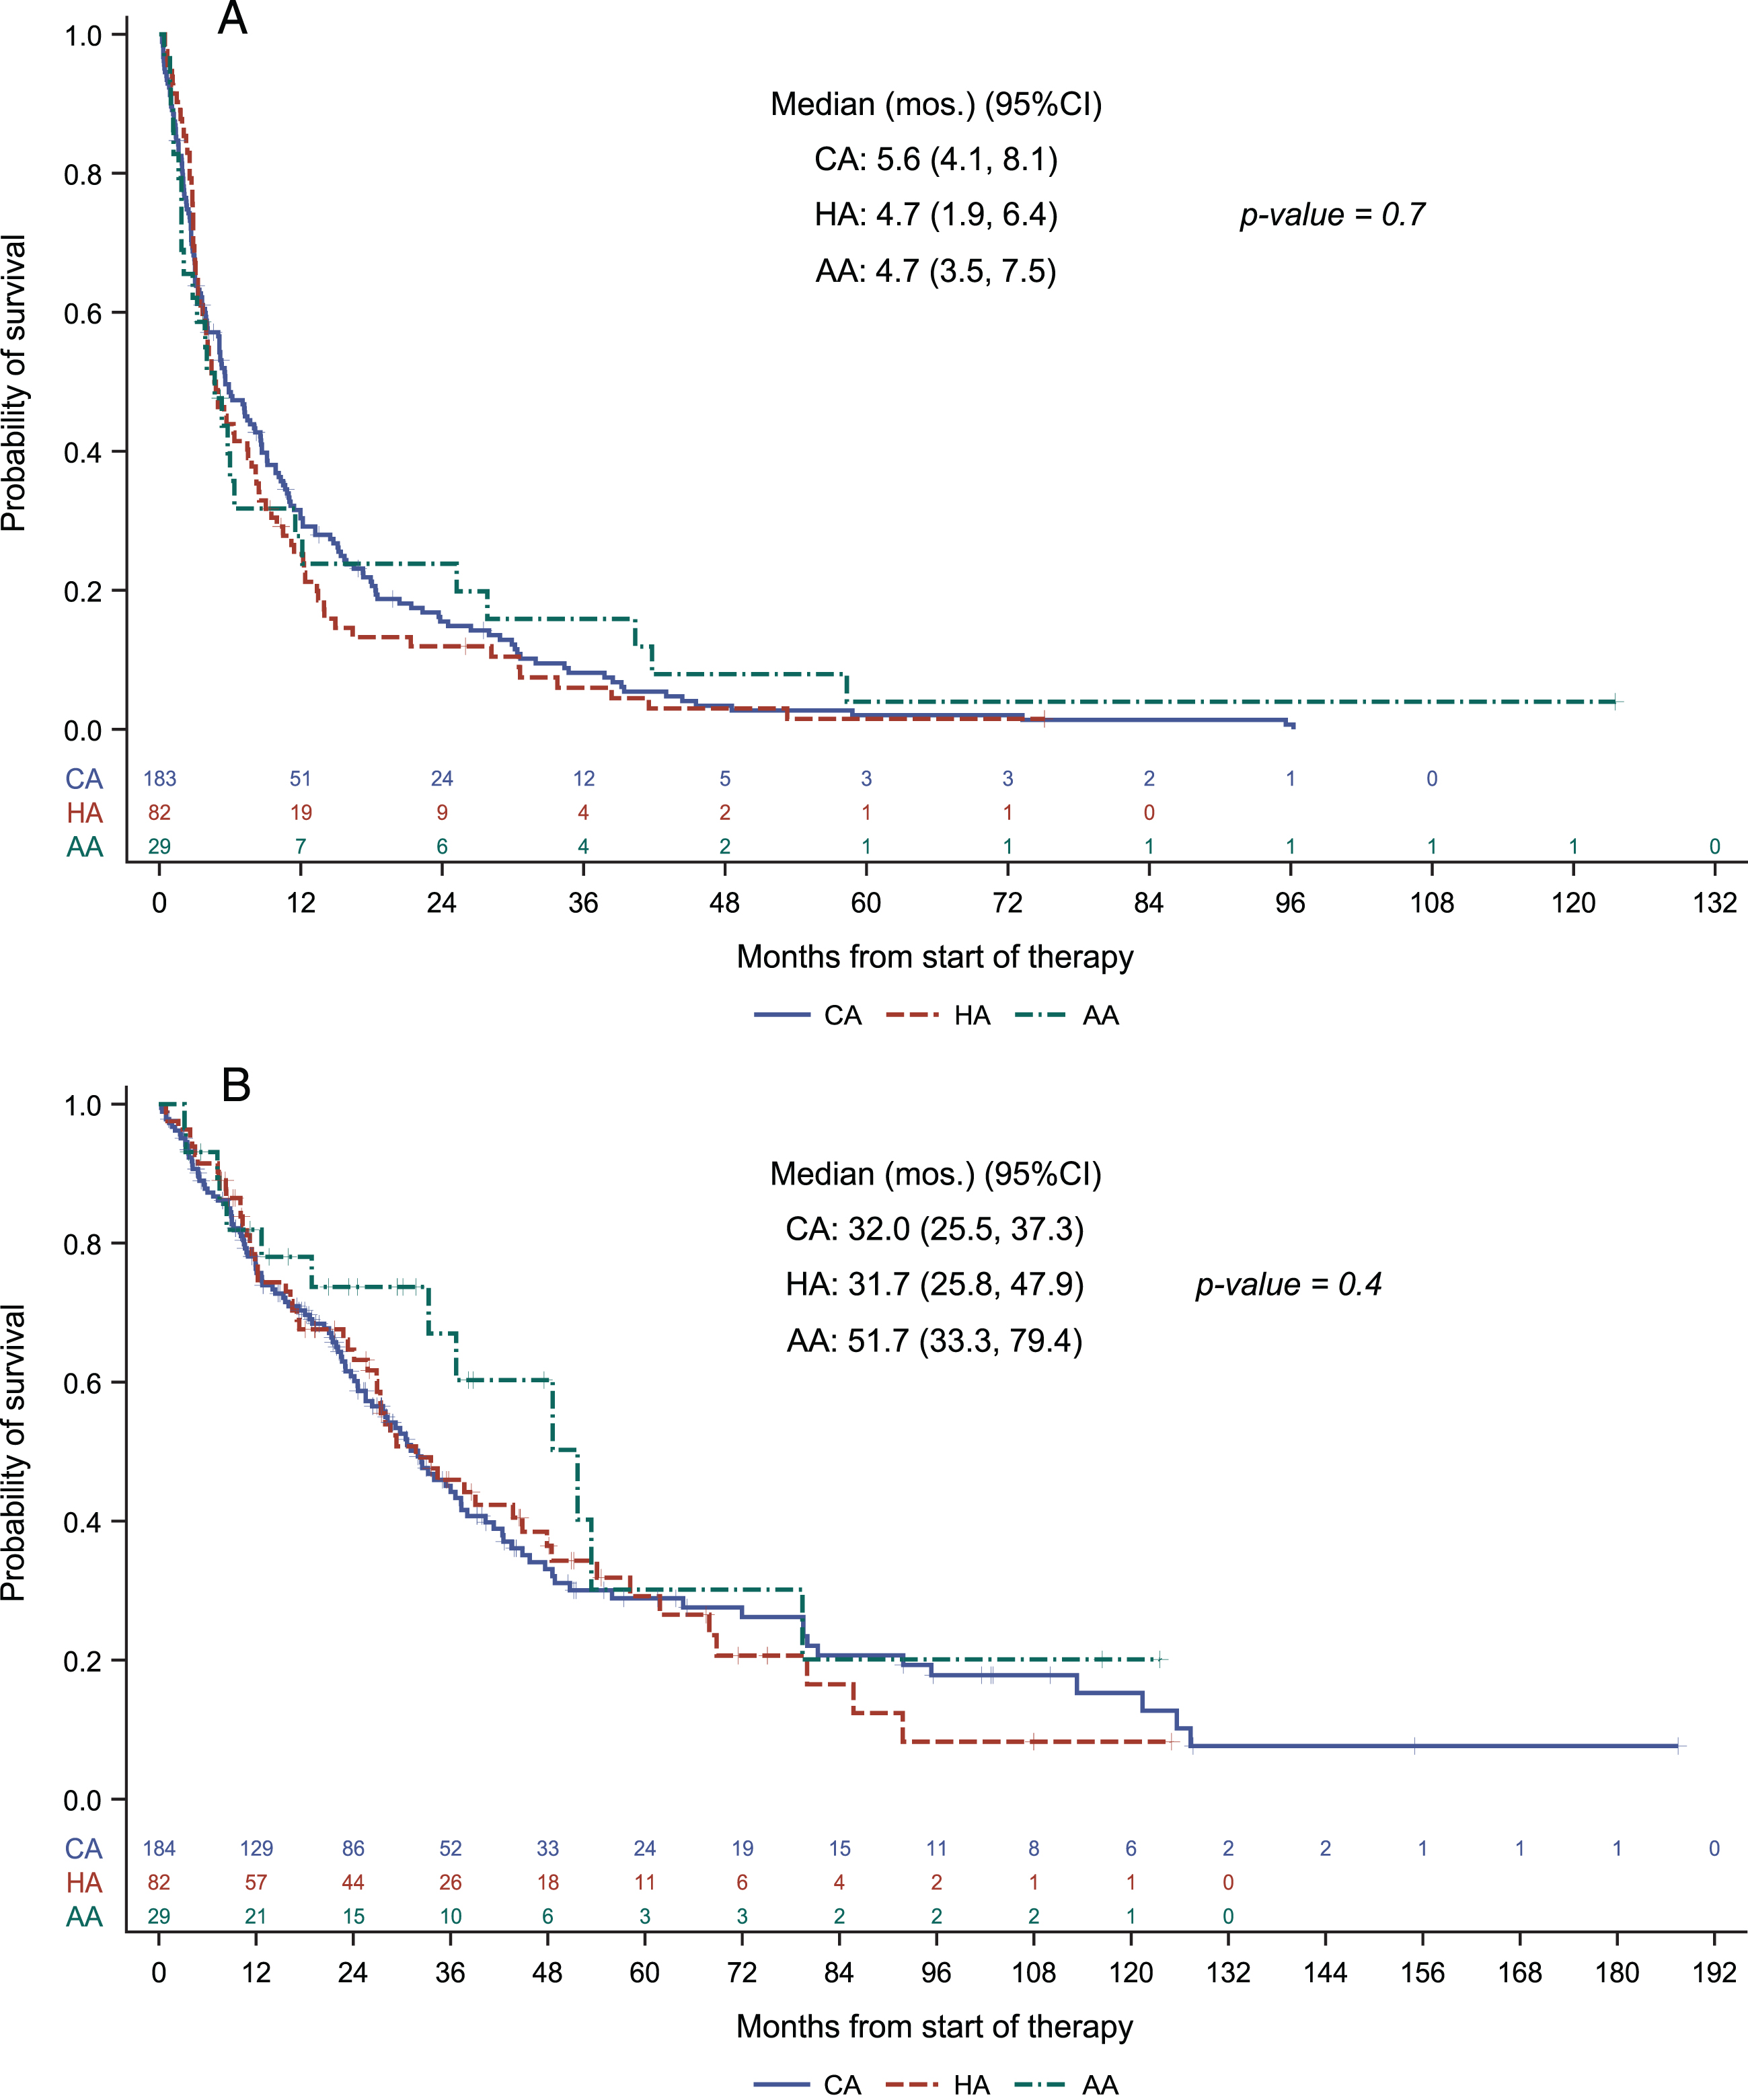 Progression free survival (A) and overall survival (B) across racial/ethnic groups.